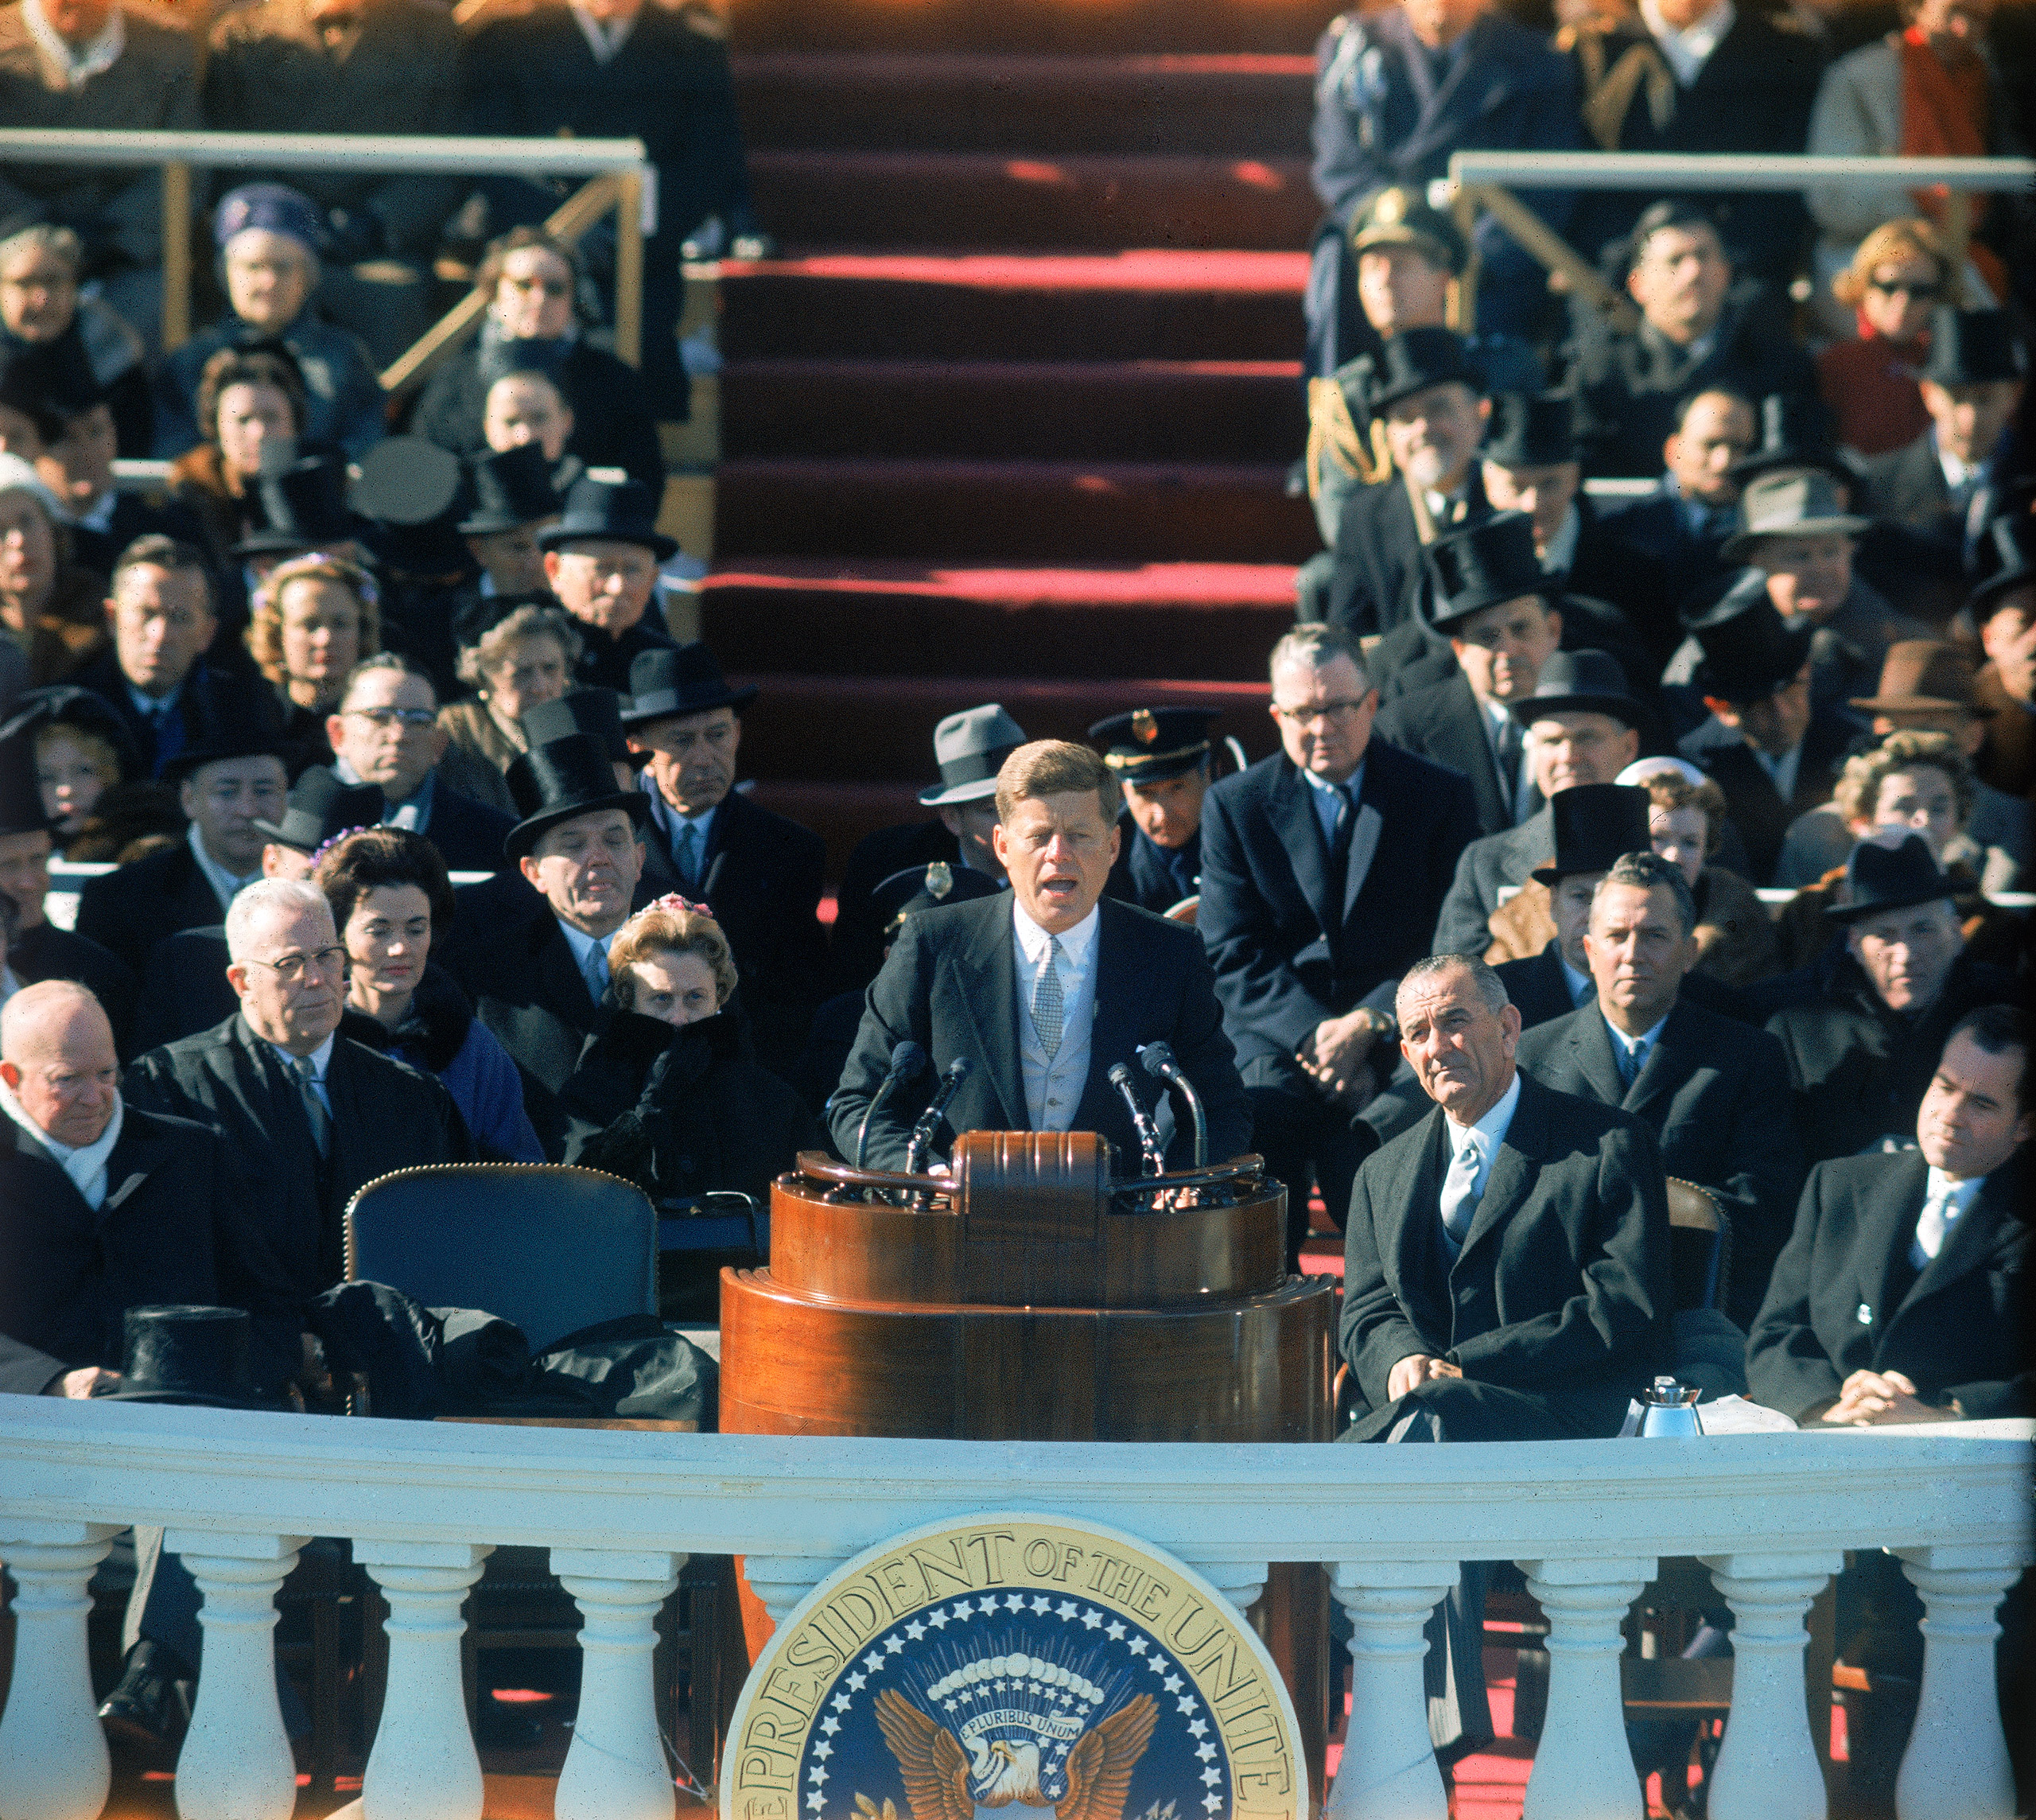 John F. Kennedy delivering his inaugural speech, 1961.